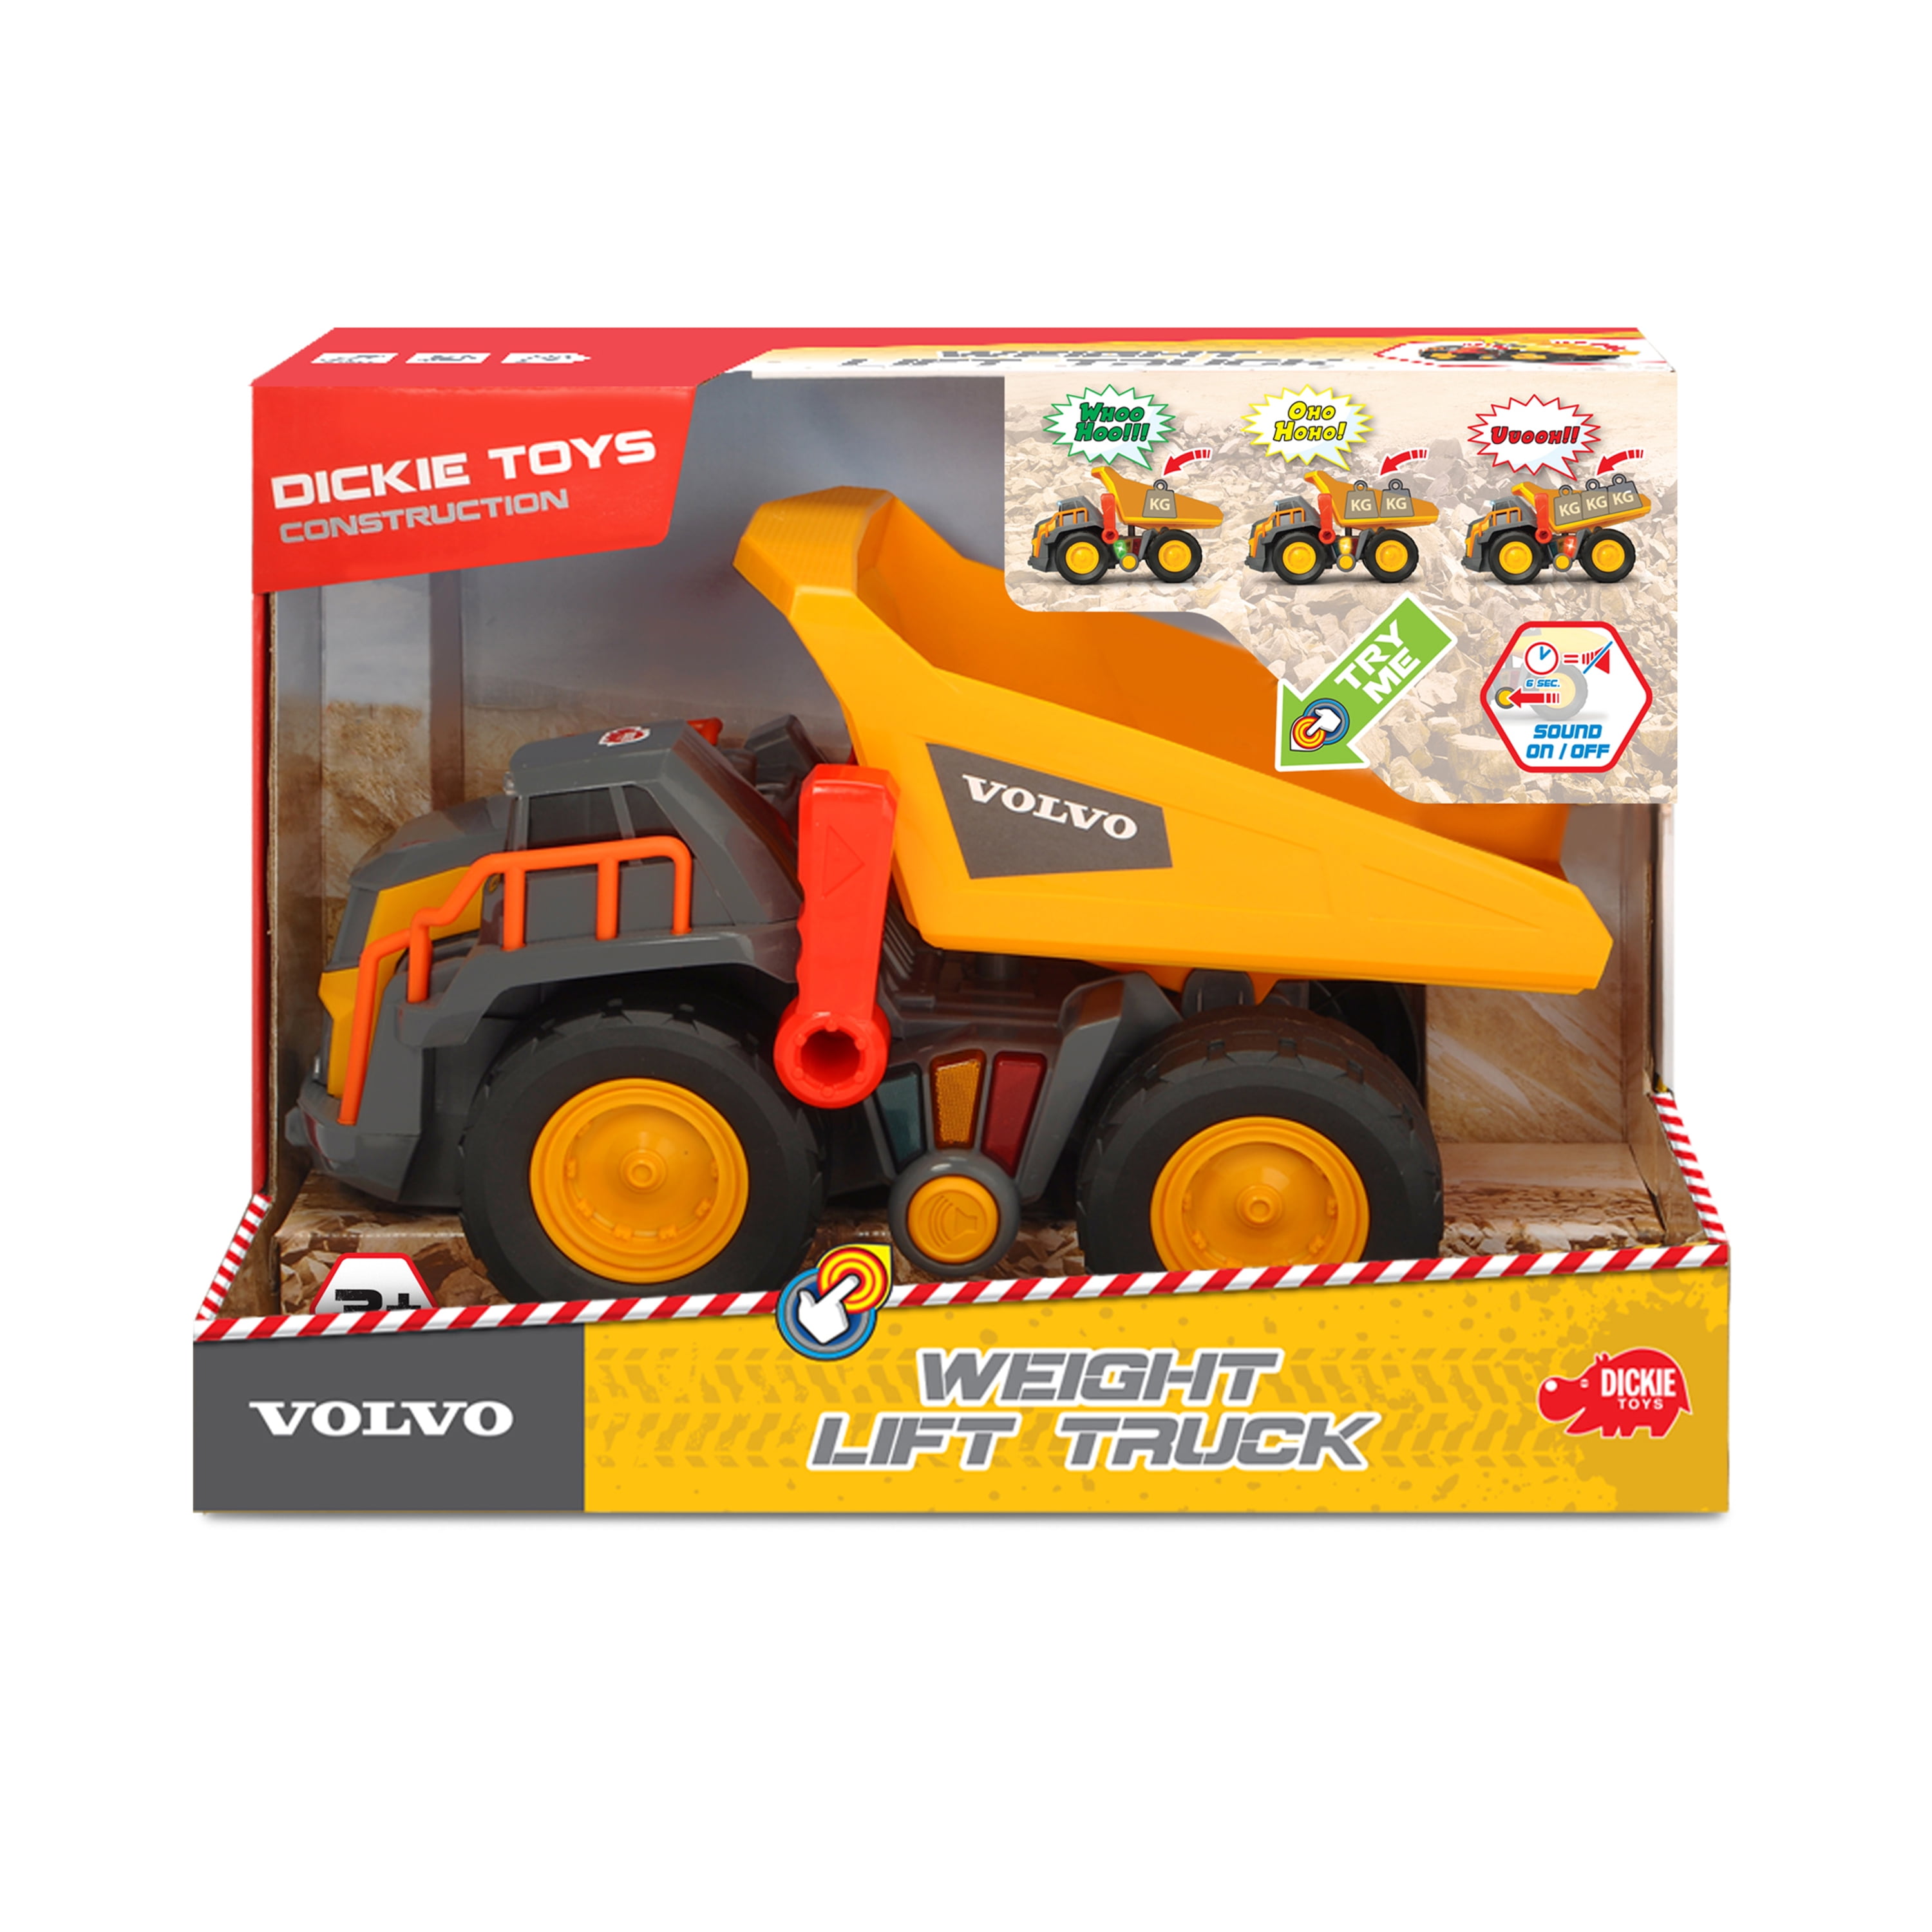 Dickie Toys 10" Volvo Construction Kids Gift Set Christmas Present Diggers 